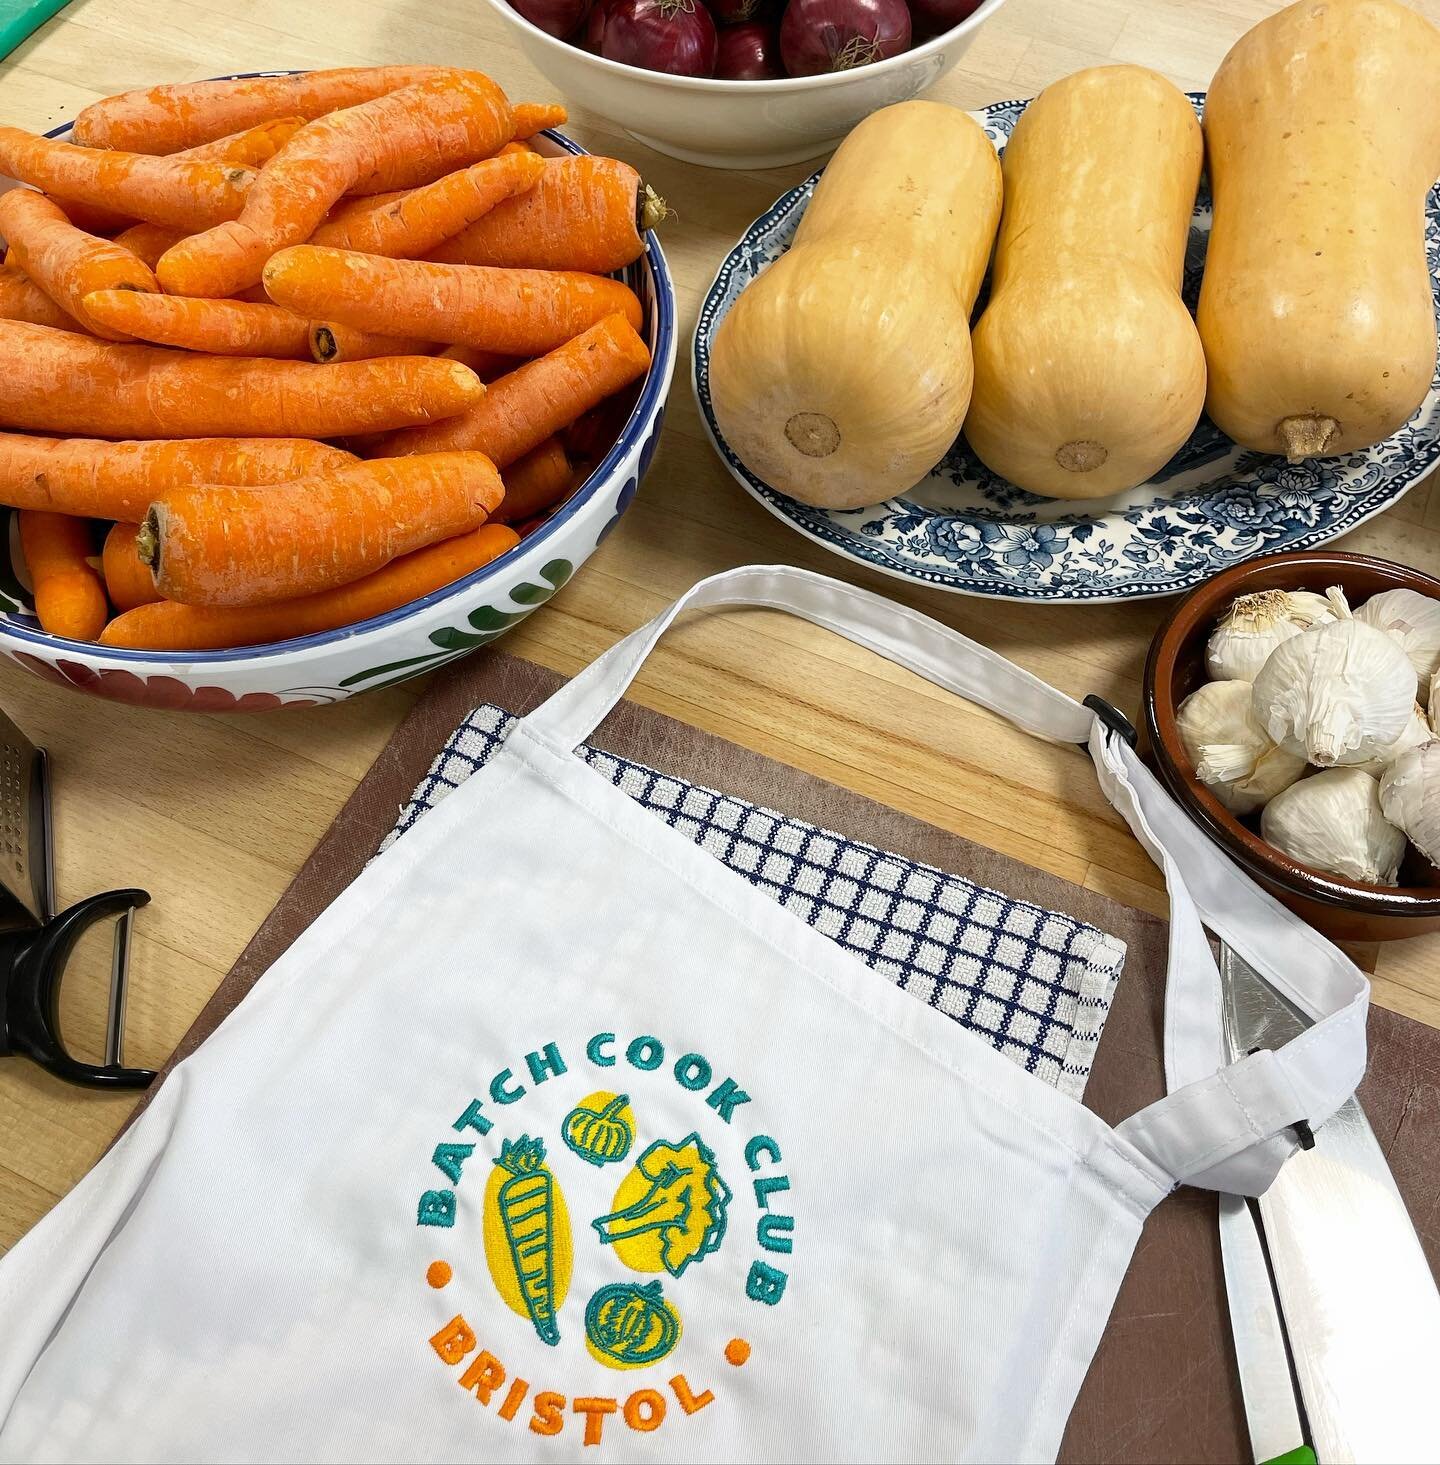 Have you signed up for a Little Feast Lunch yet? It&rsquo;s our last (for now!) free community lunch at St Anne&rsquo;s House tomorrow - so pop by, enjoy a delicious and nutritious meal and meet your neighbours!

We have our &lsquo;All the Veg&rsquo;